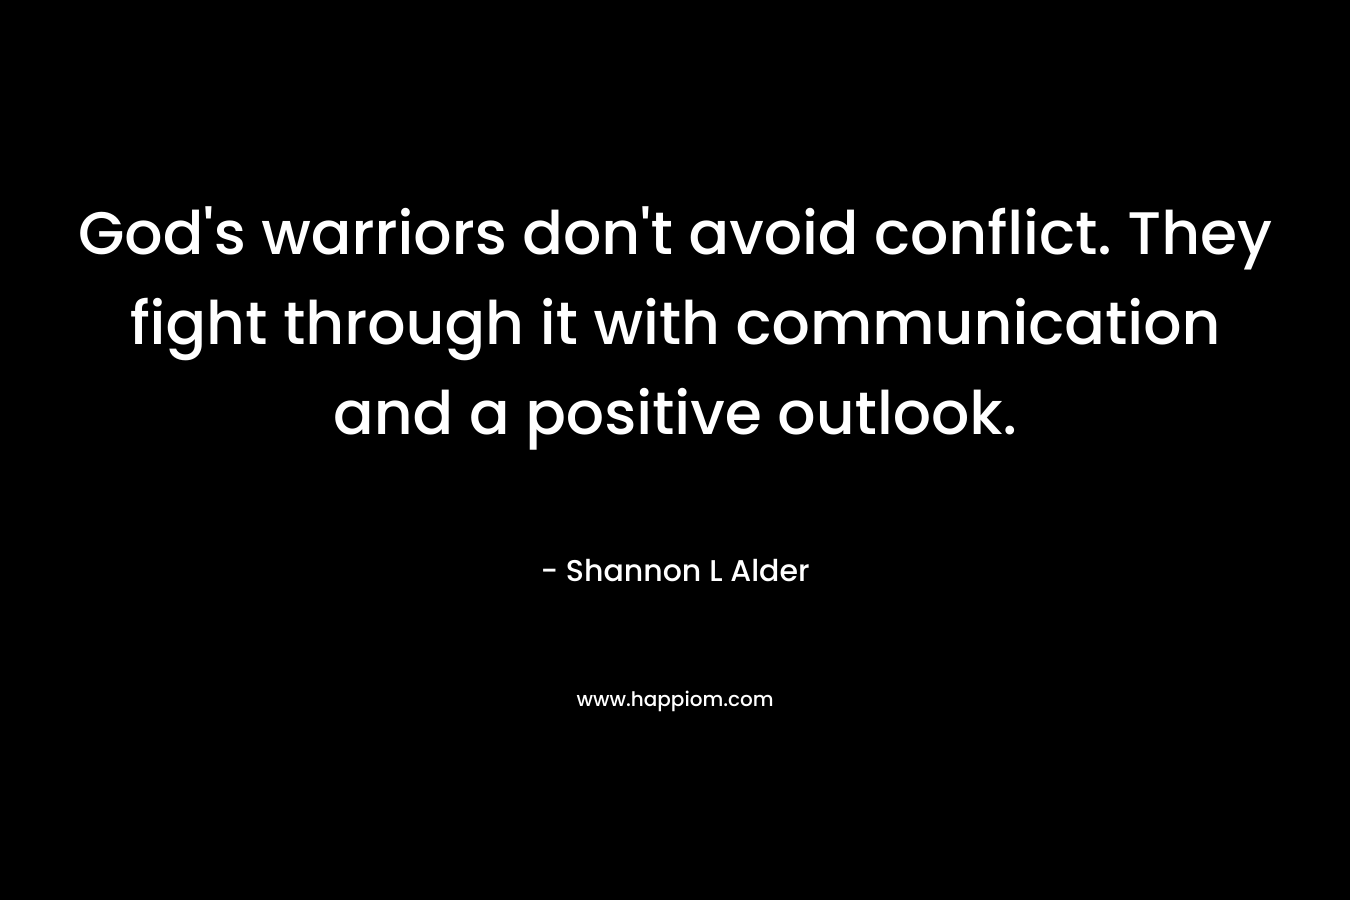 God's warriors don't avoid conflict. They fight through it with communication and a positive outlook.